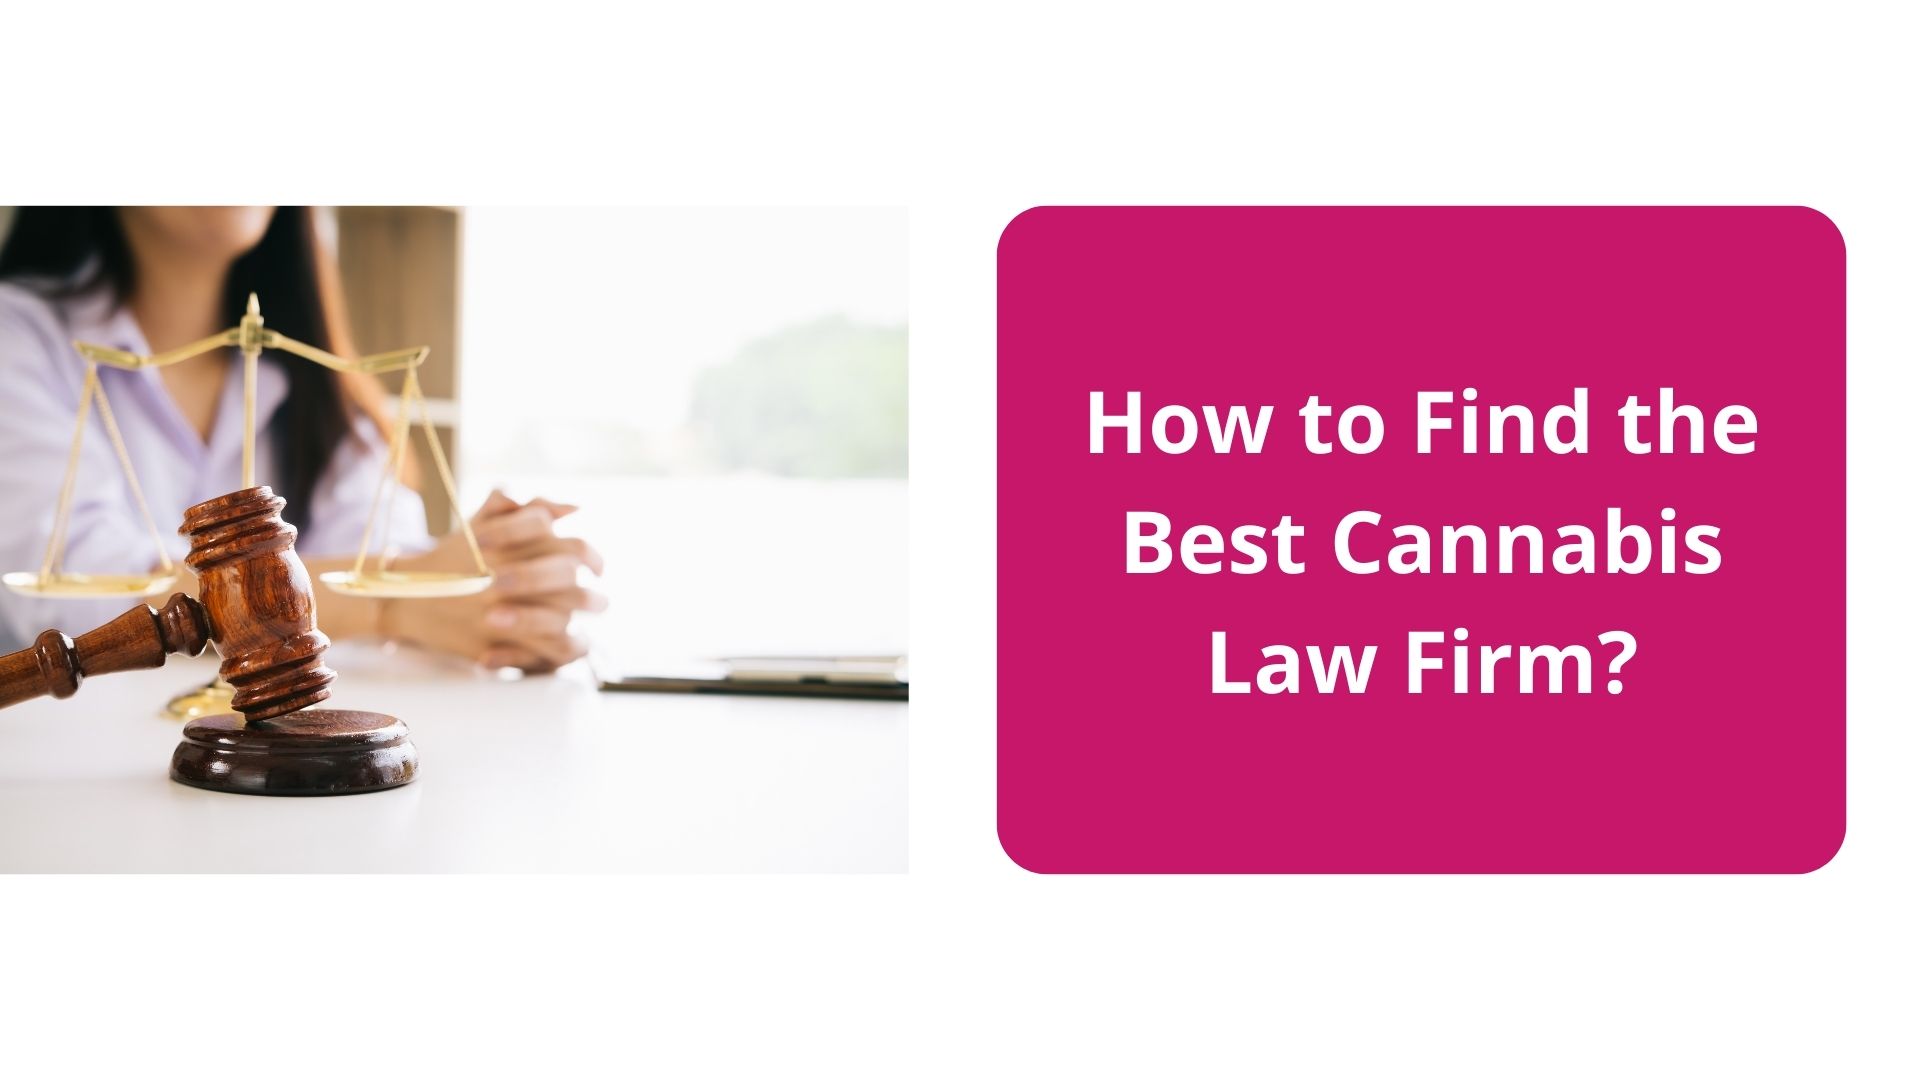 How to Find the Best Cannabis Law Firm